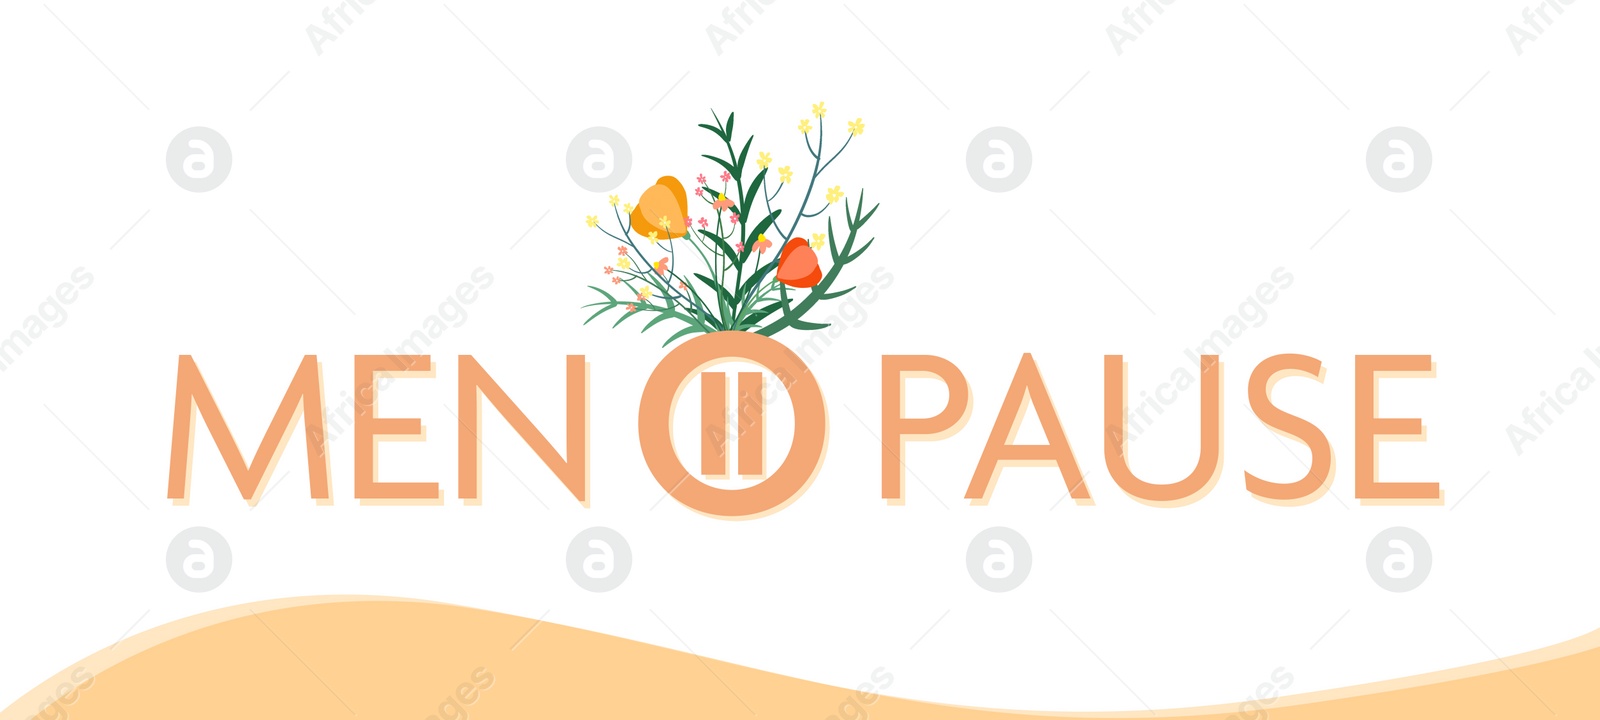 Illustration of Menstrual cycle. Word Menopause with letter O as pause button and flowers illustration on color background, banner design